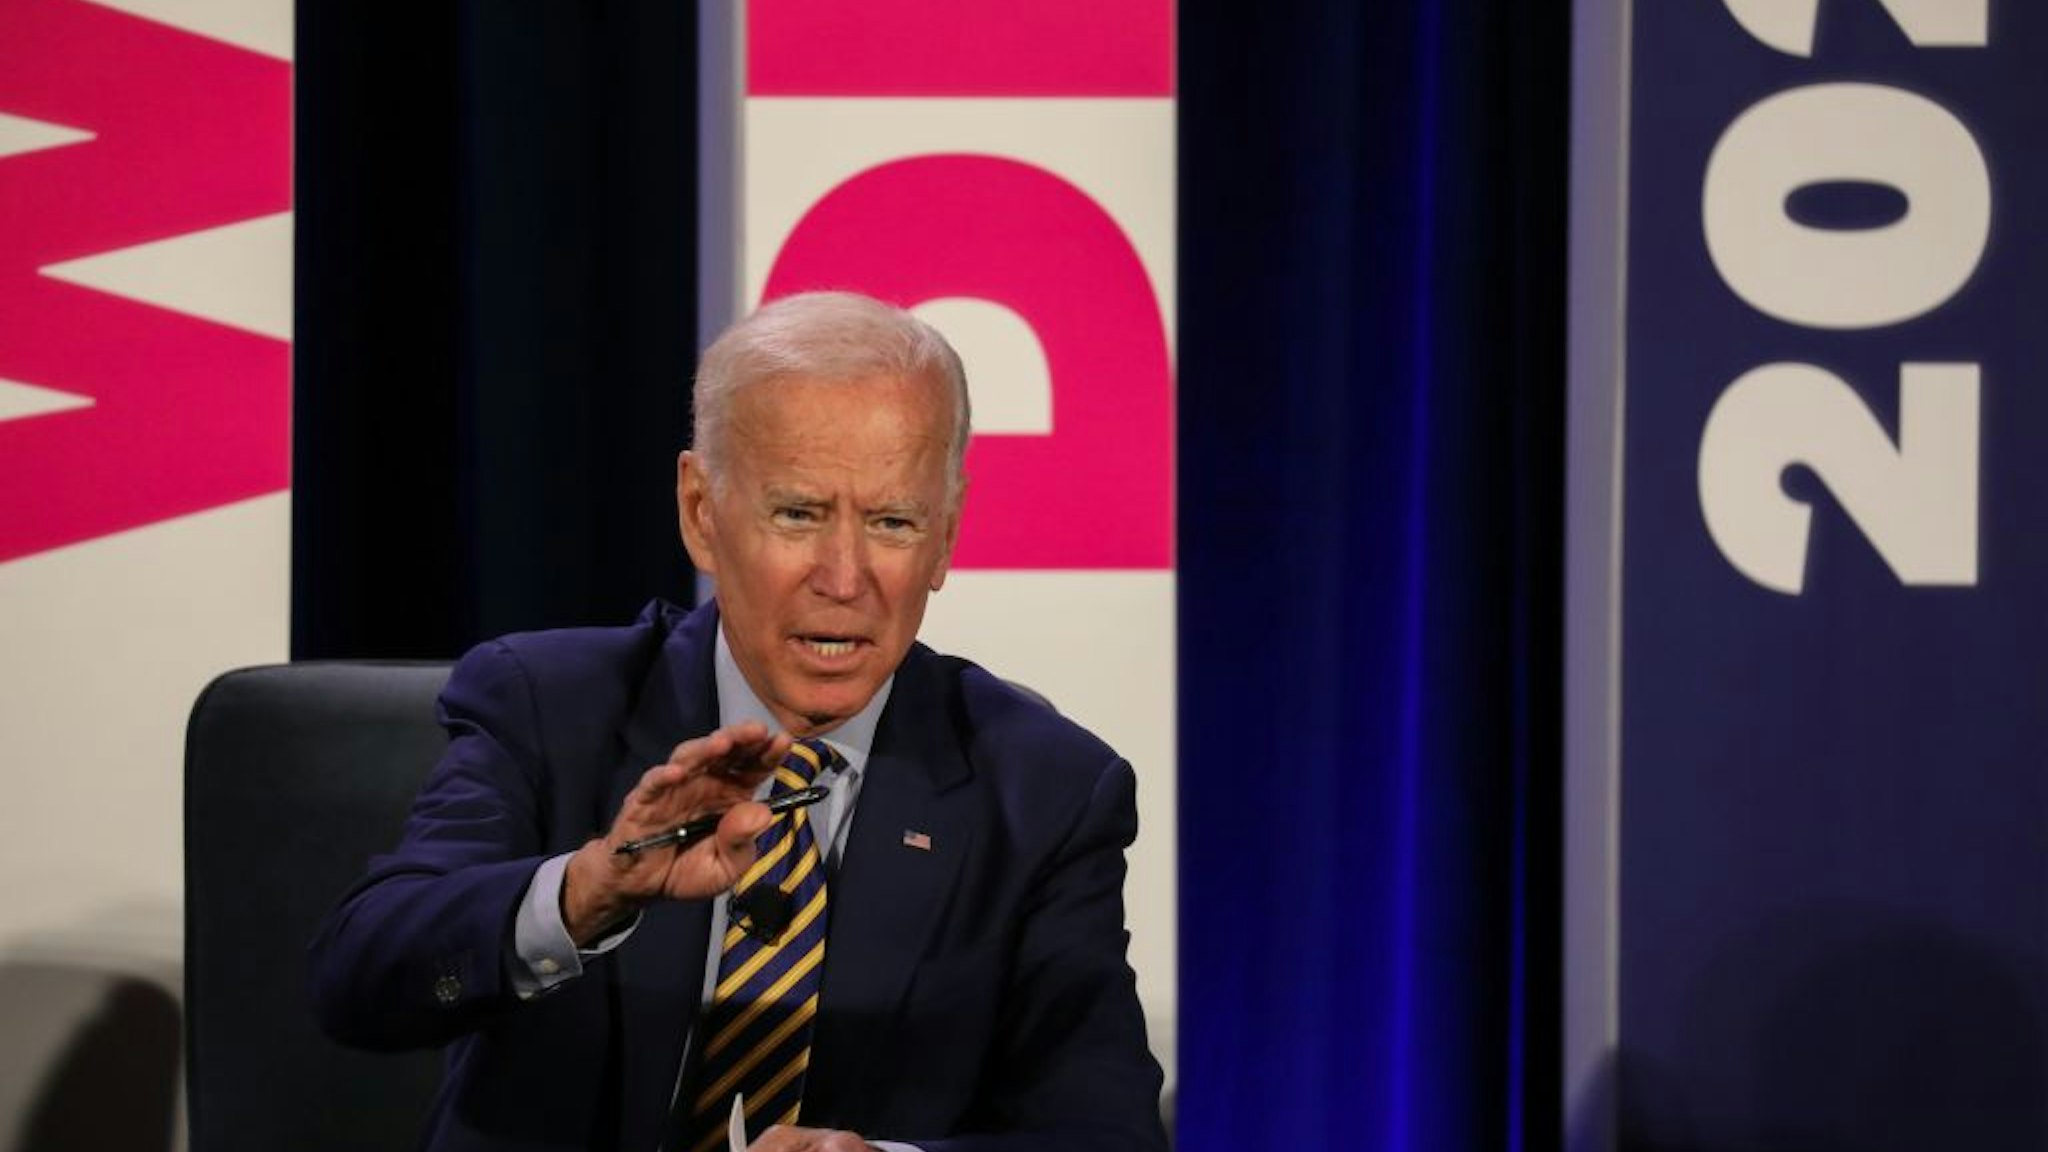 Former Vice President, Joe Biden, adresses the audience at the We Decide: Planned Parenthood Action Fund 2020 Election Forum to Focus on Abortion and Reproductive Rights event in Columbia, SC on June, 22 2019. - Many of the Democratic candidates running for president are in Columbia to make appearances at the South Carolina Democratic Party Convention and the Planned Parenthood Election Forum on June 22.